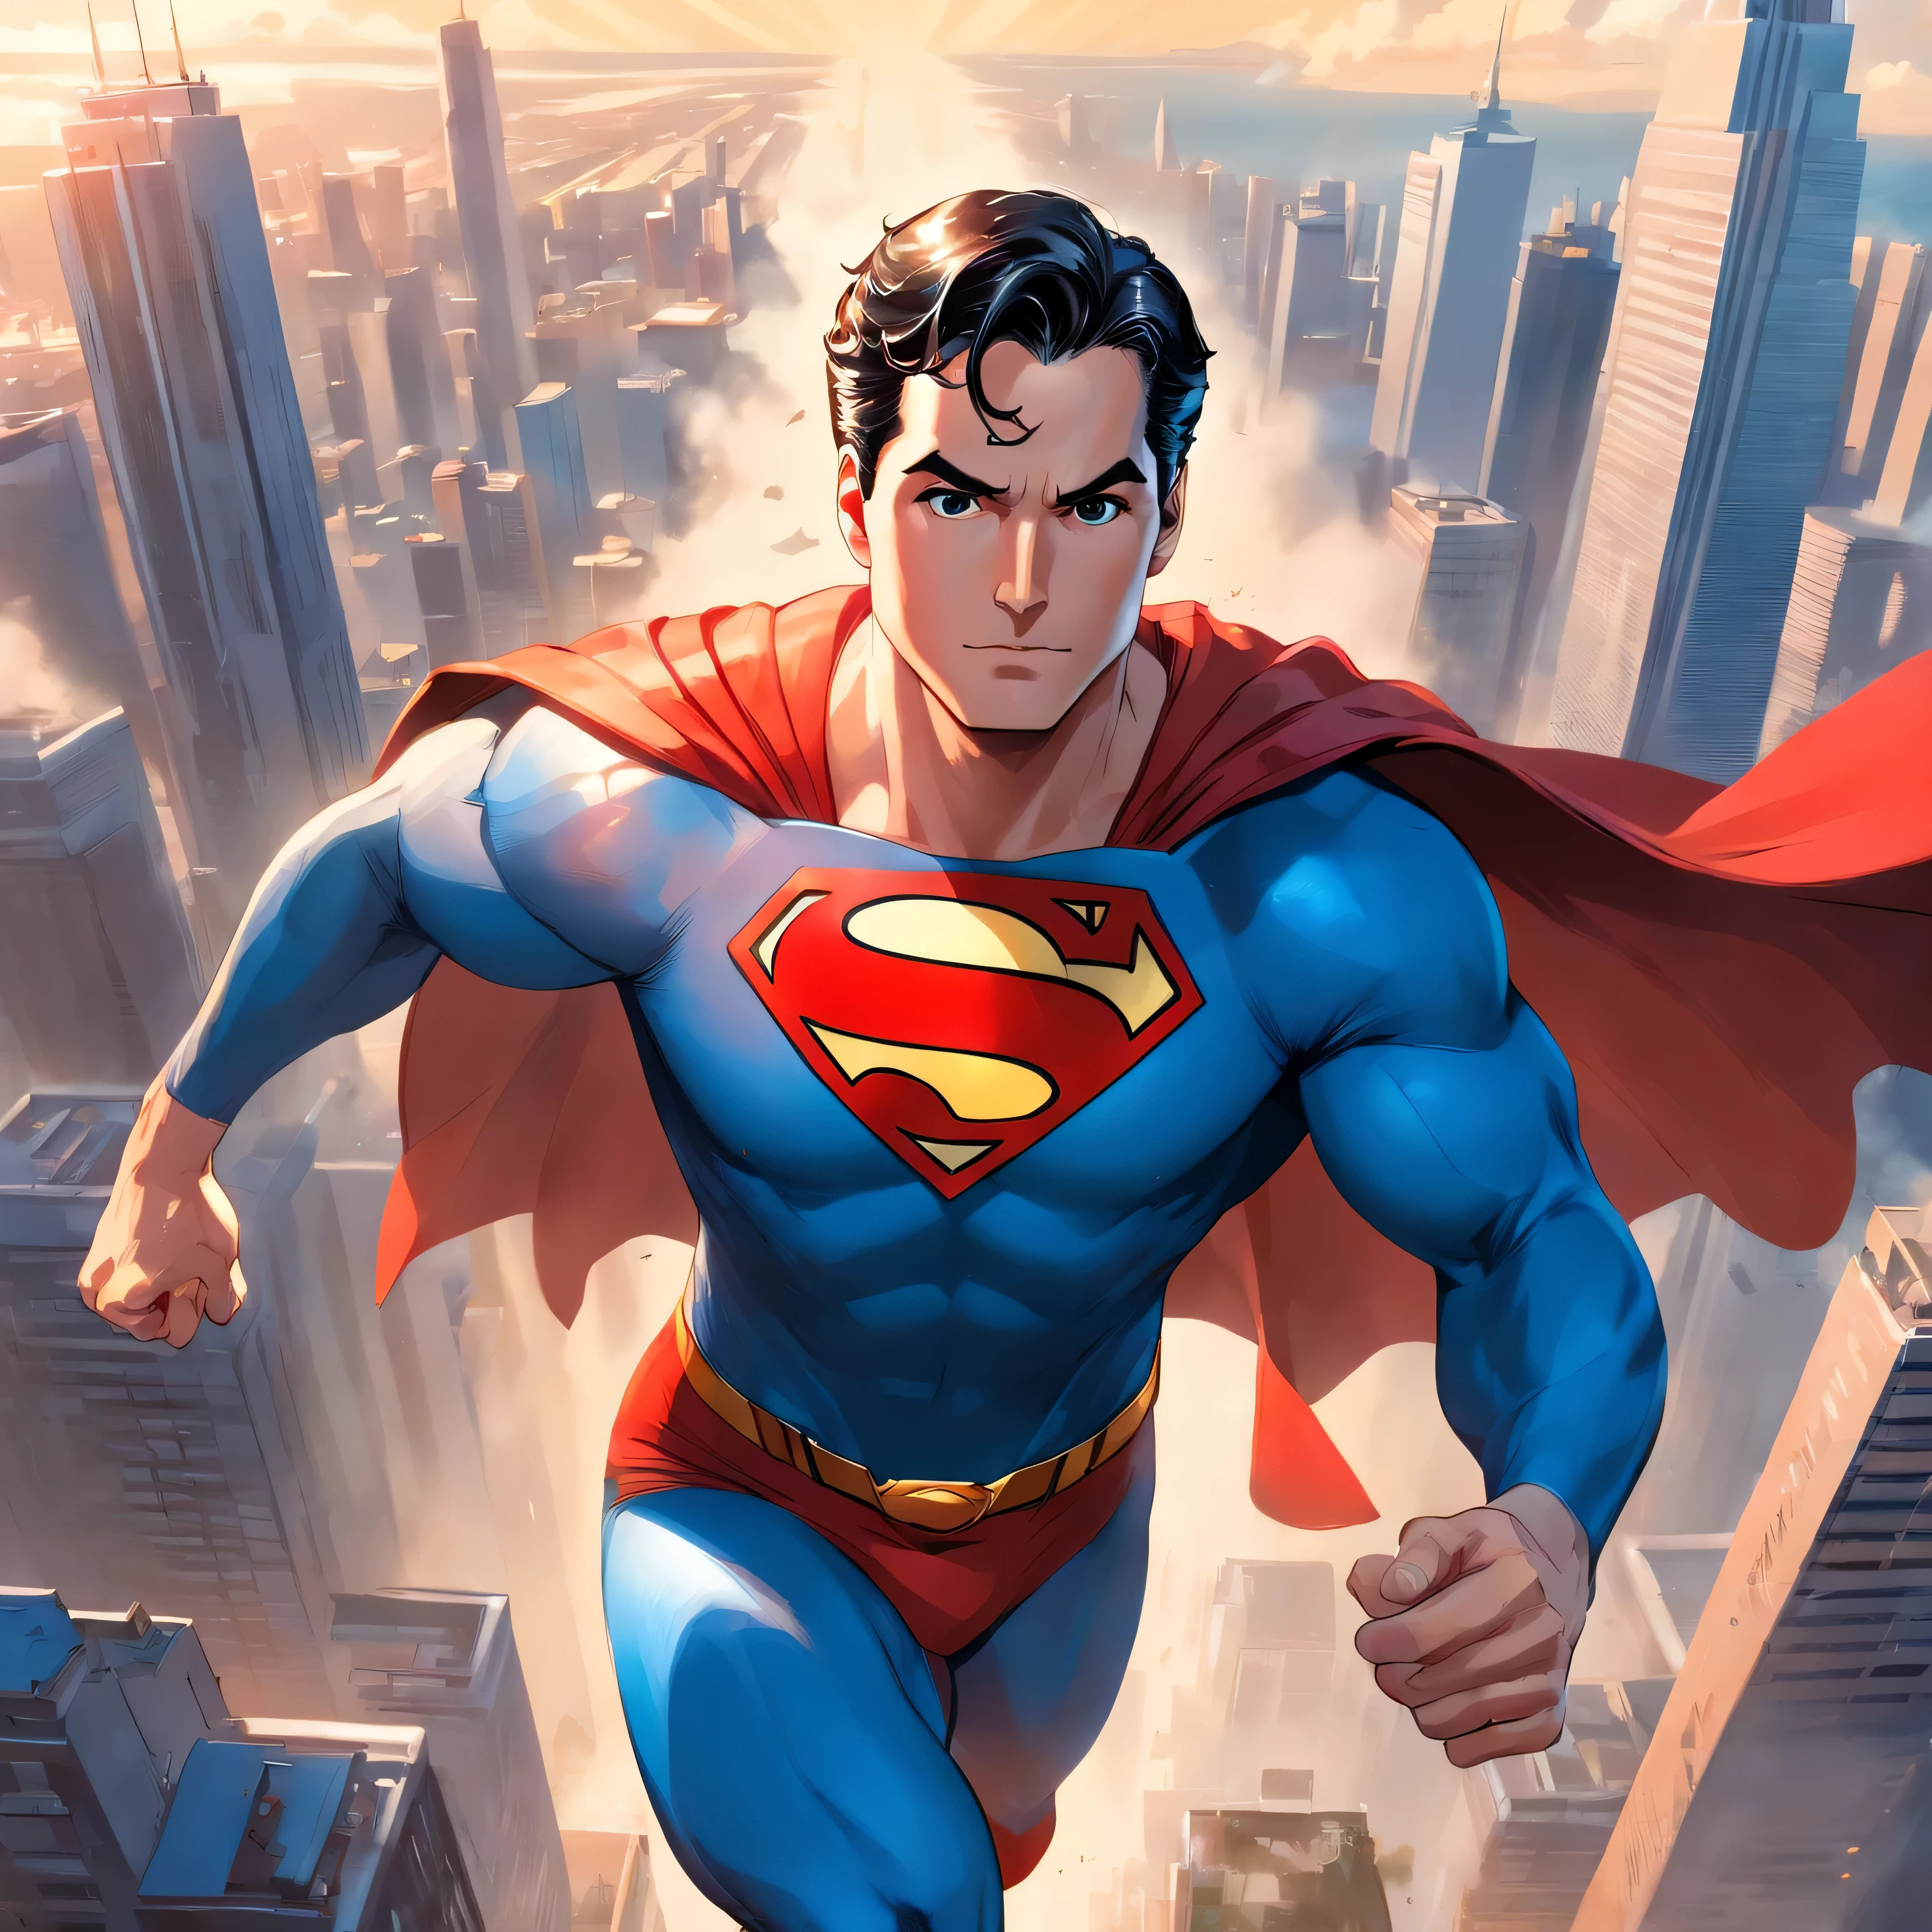 Superman Artwork with Iconic Pose